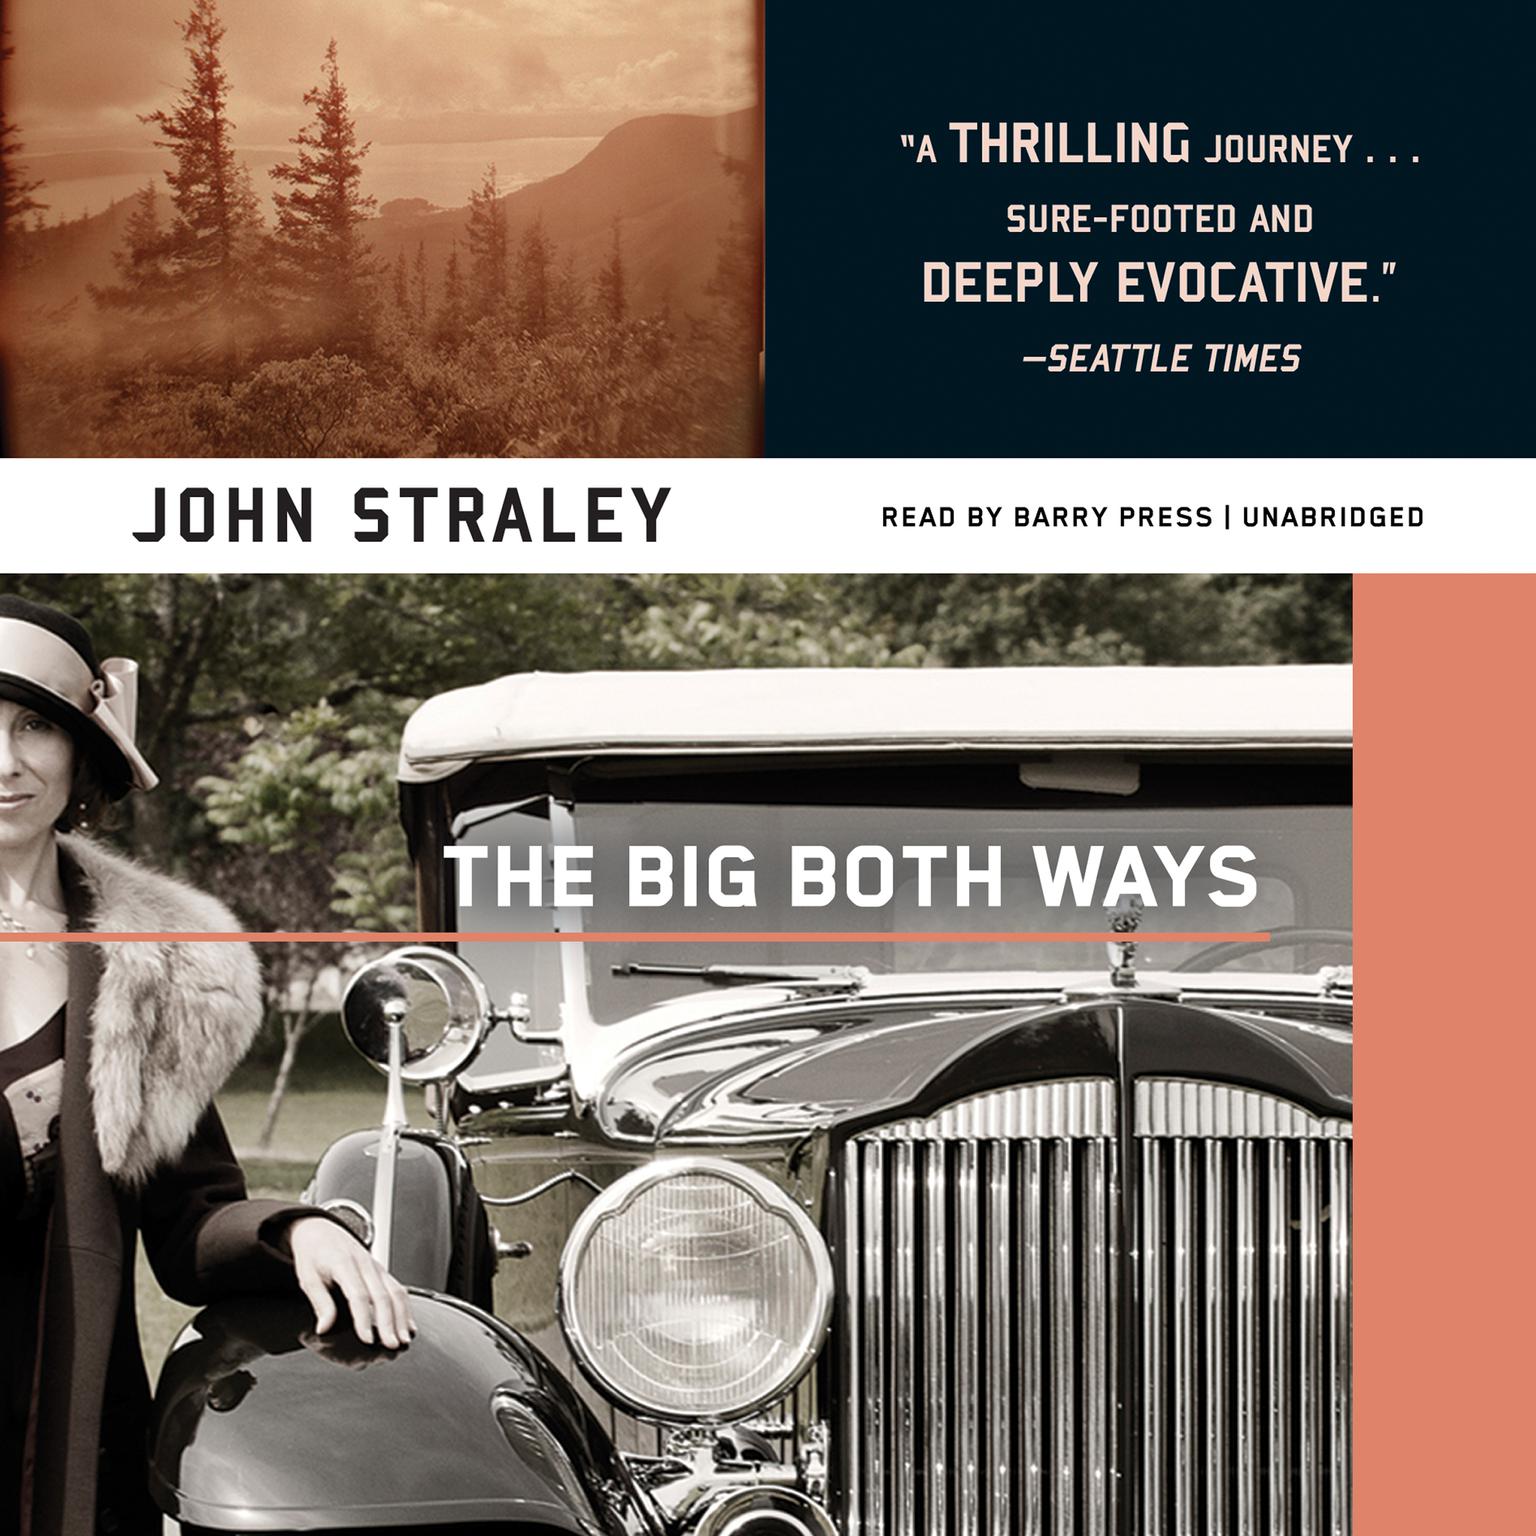 The Big Both Ways Audiobook, by John Straley